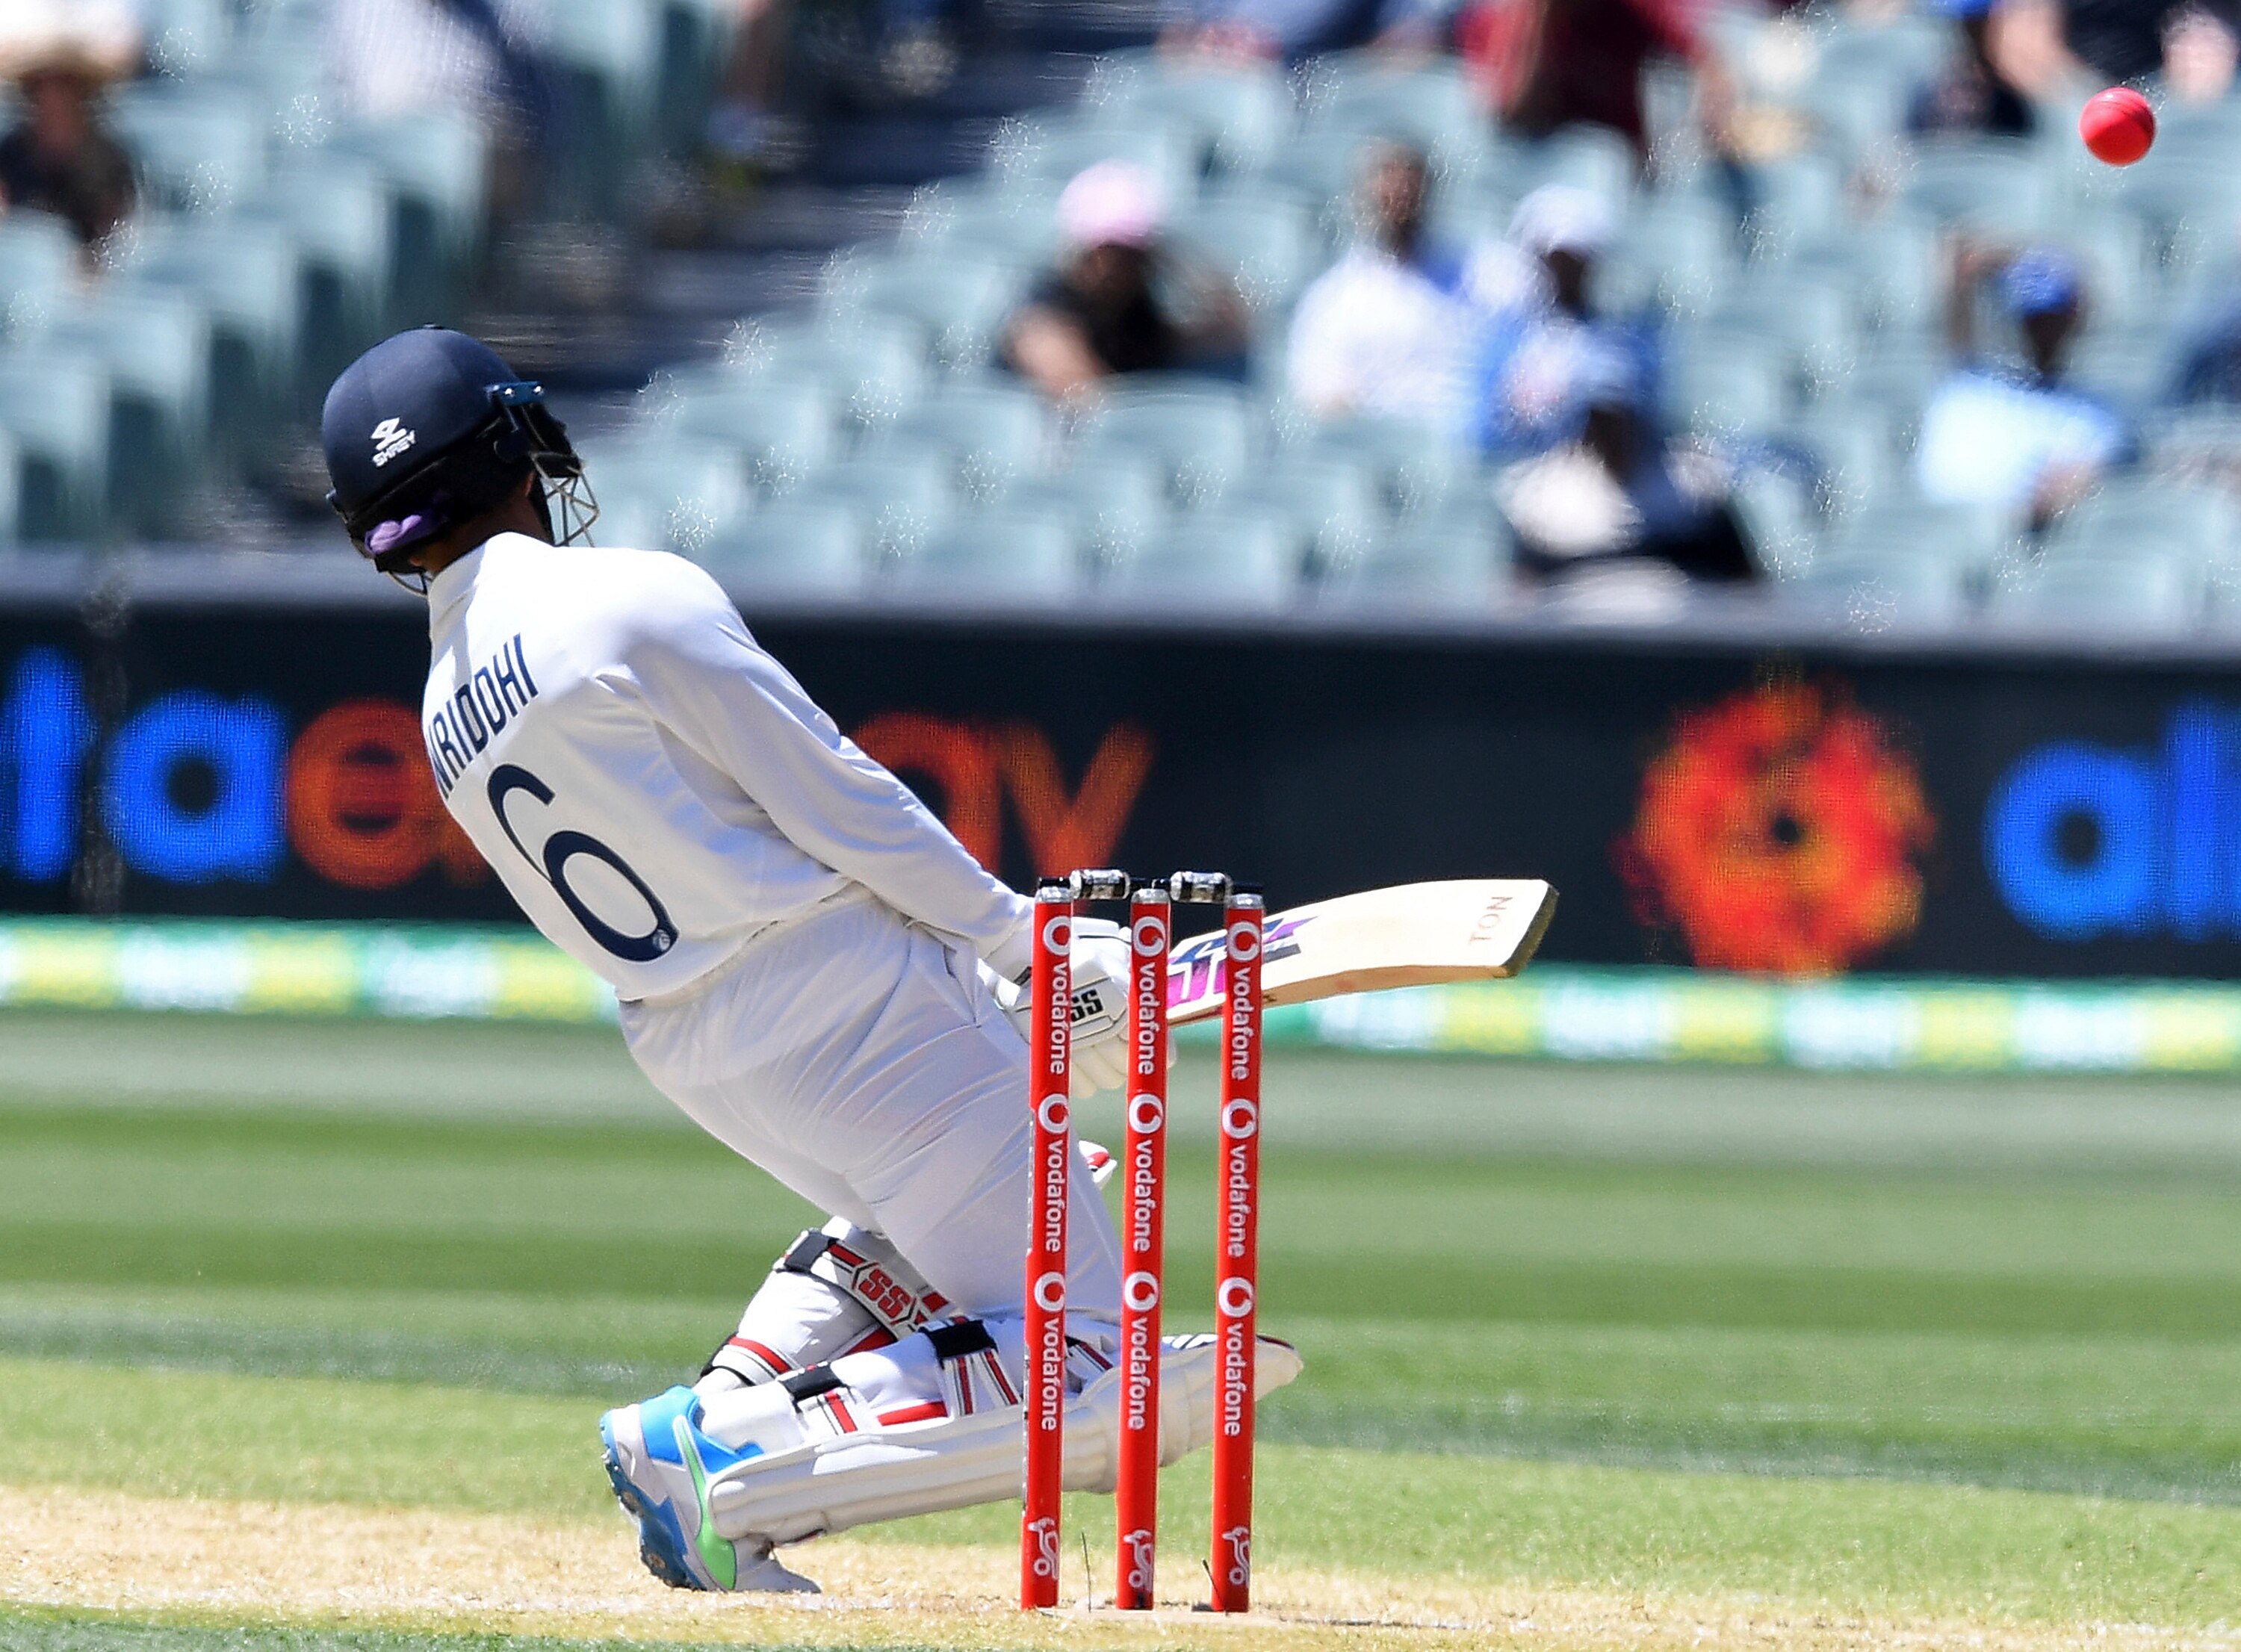 India's Wriddhiman Saha swerves to avoid a high delivery from Australia on the third day of their cricket test match at the Adelaide Oval in Adelaide, Australia, Saturday, Dec. 19, 2020. (AP Photo/David Mairuz)